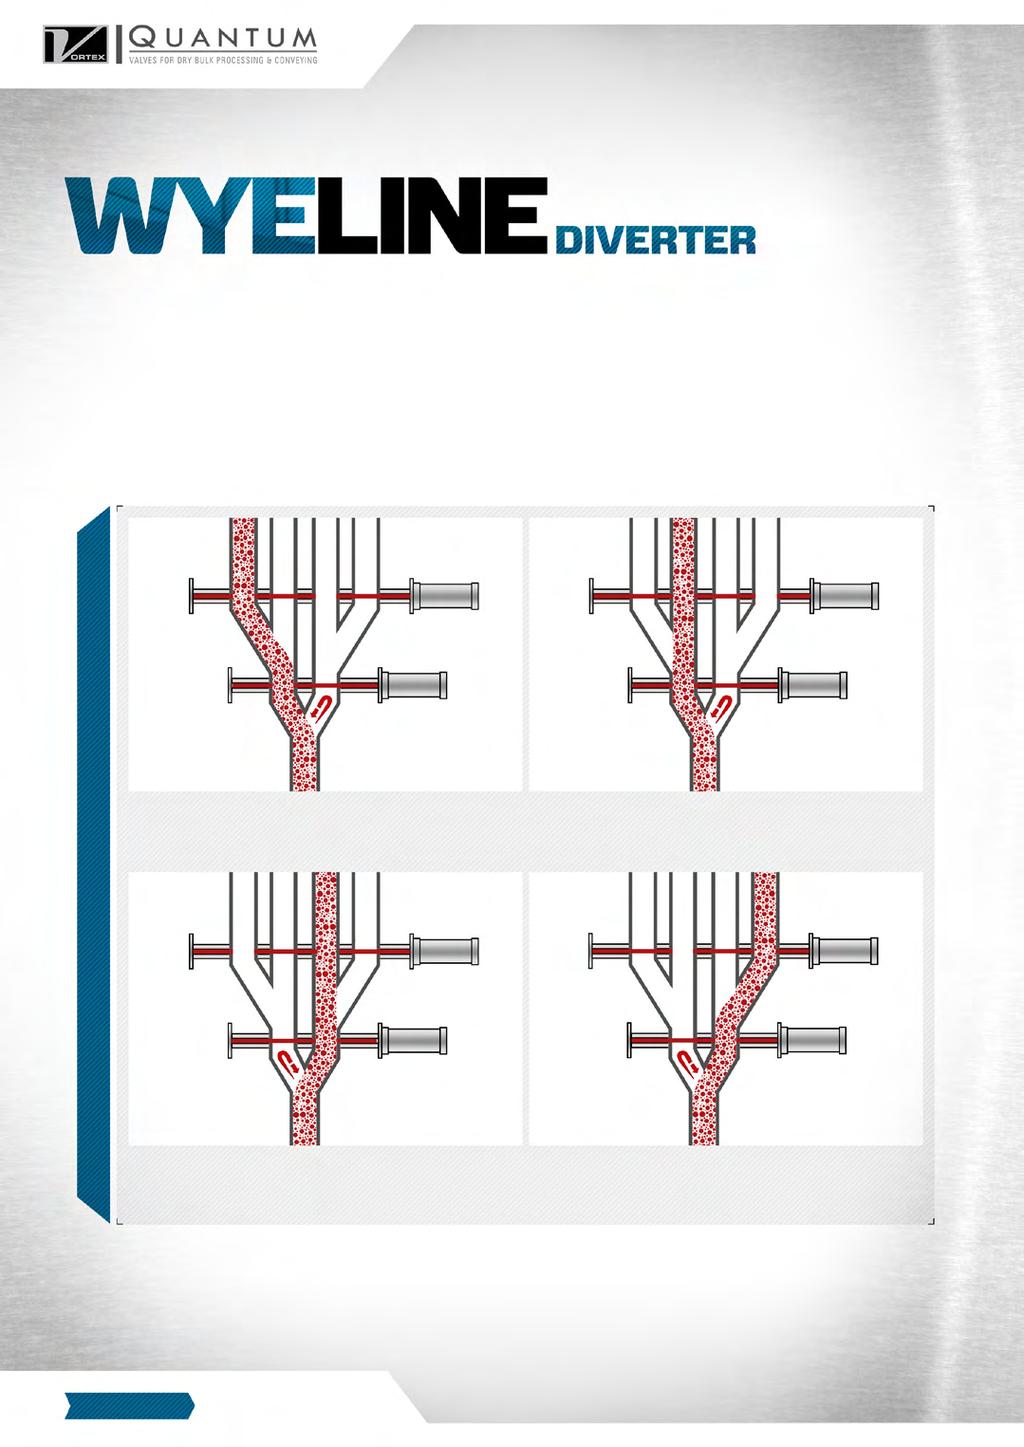 Unlike common in-line flap or plug-type diverters, Vortex s series of Wye Line Diverters offer a wider range of dilute phase and vacuum conveying options.